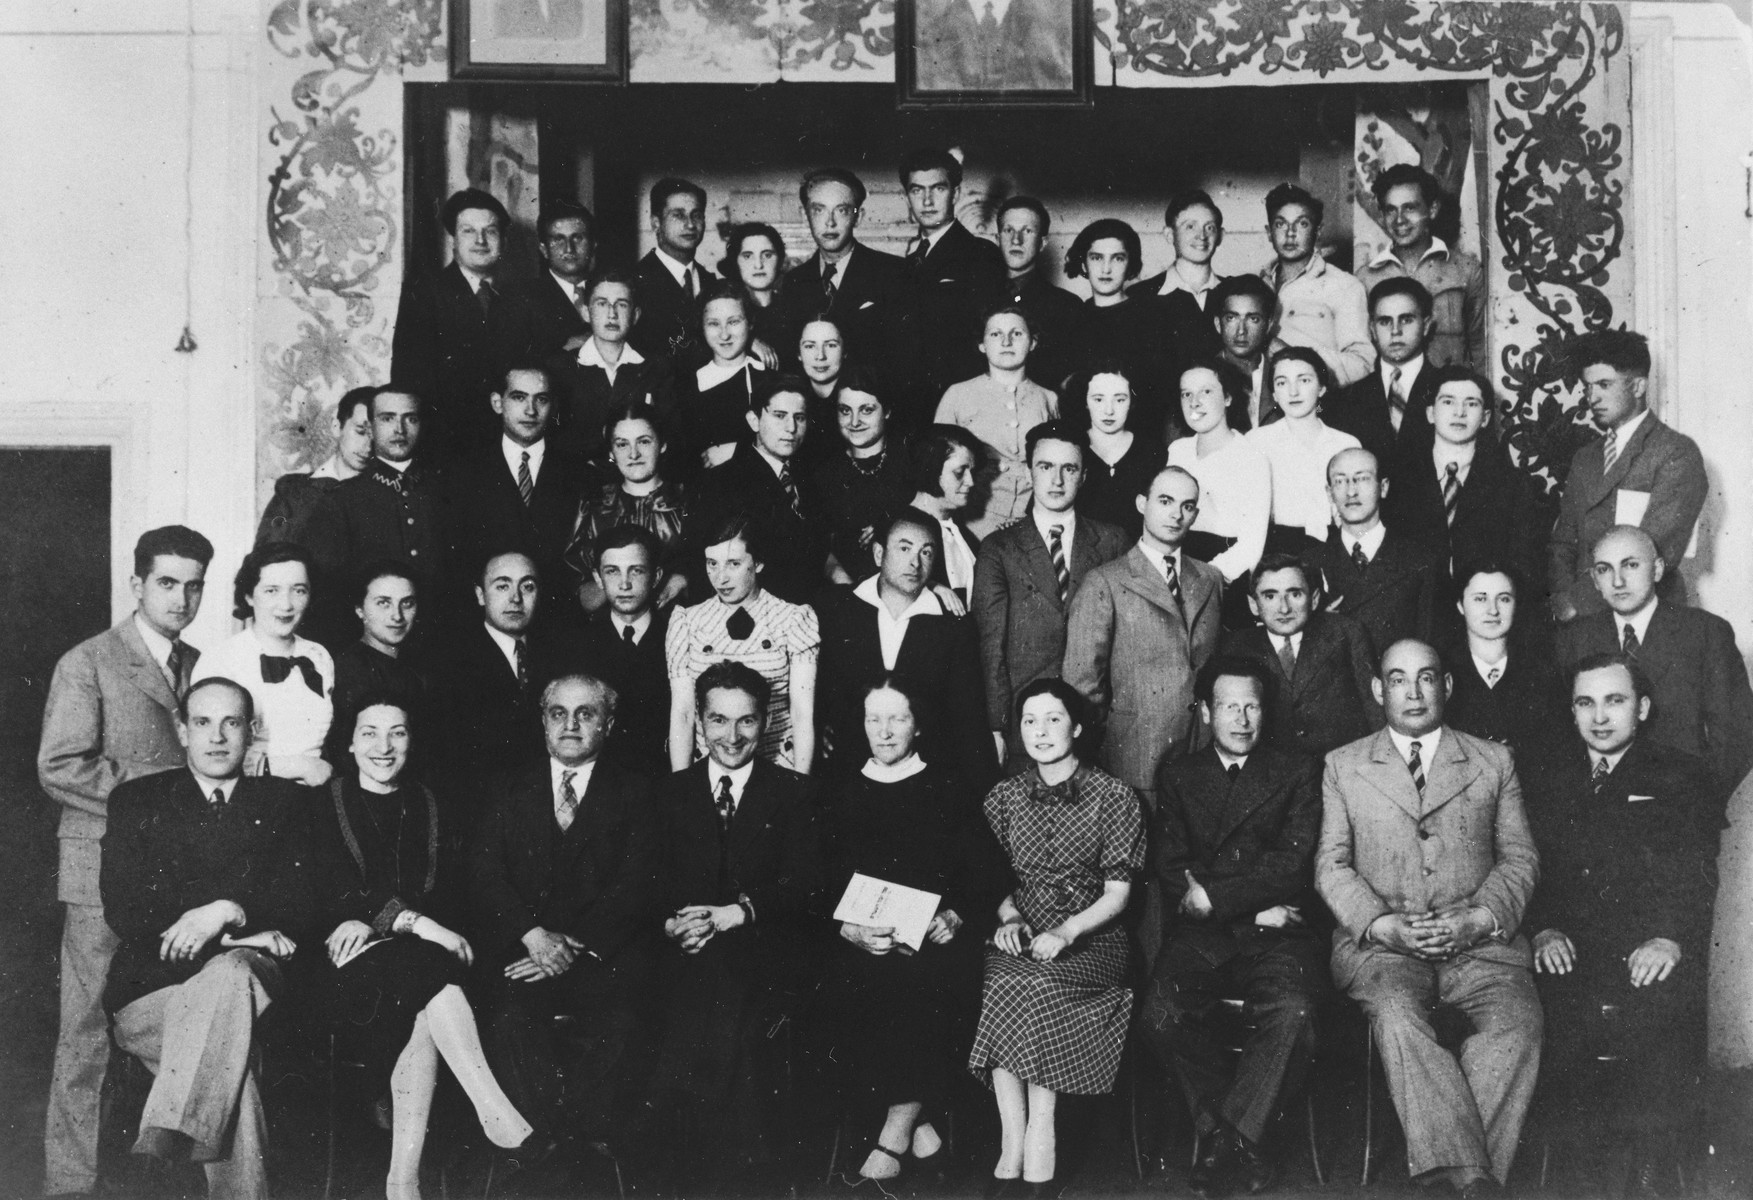 Group portrait of the alumni of the Hebrew language Tarbut school in Vilna taken on the twentieth anniversary of the Hebrew gymnasium.  

Among those pictured is Ralph Denishevsky (front row, left).